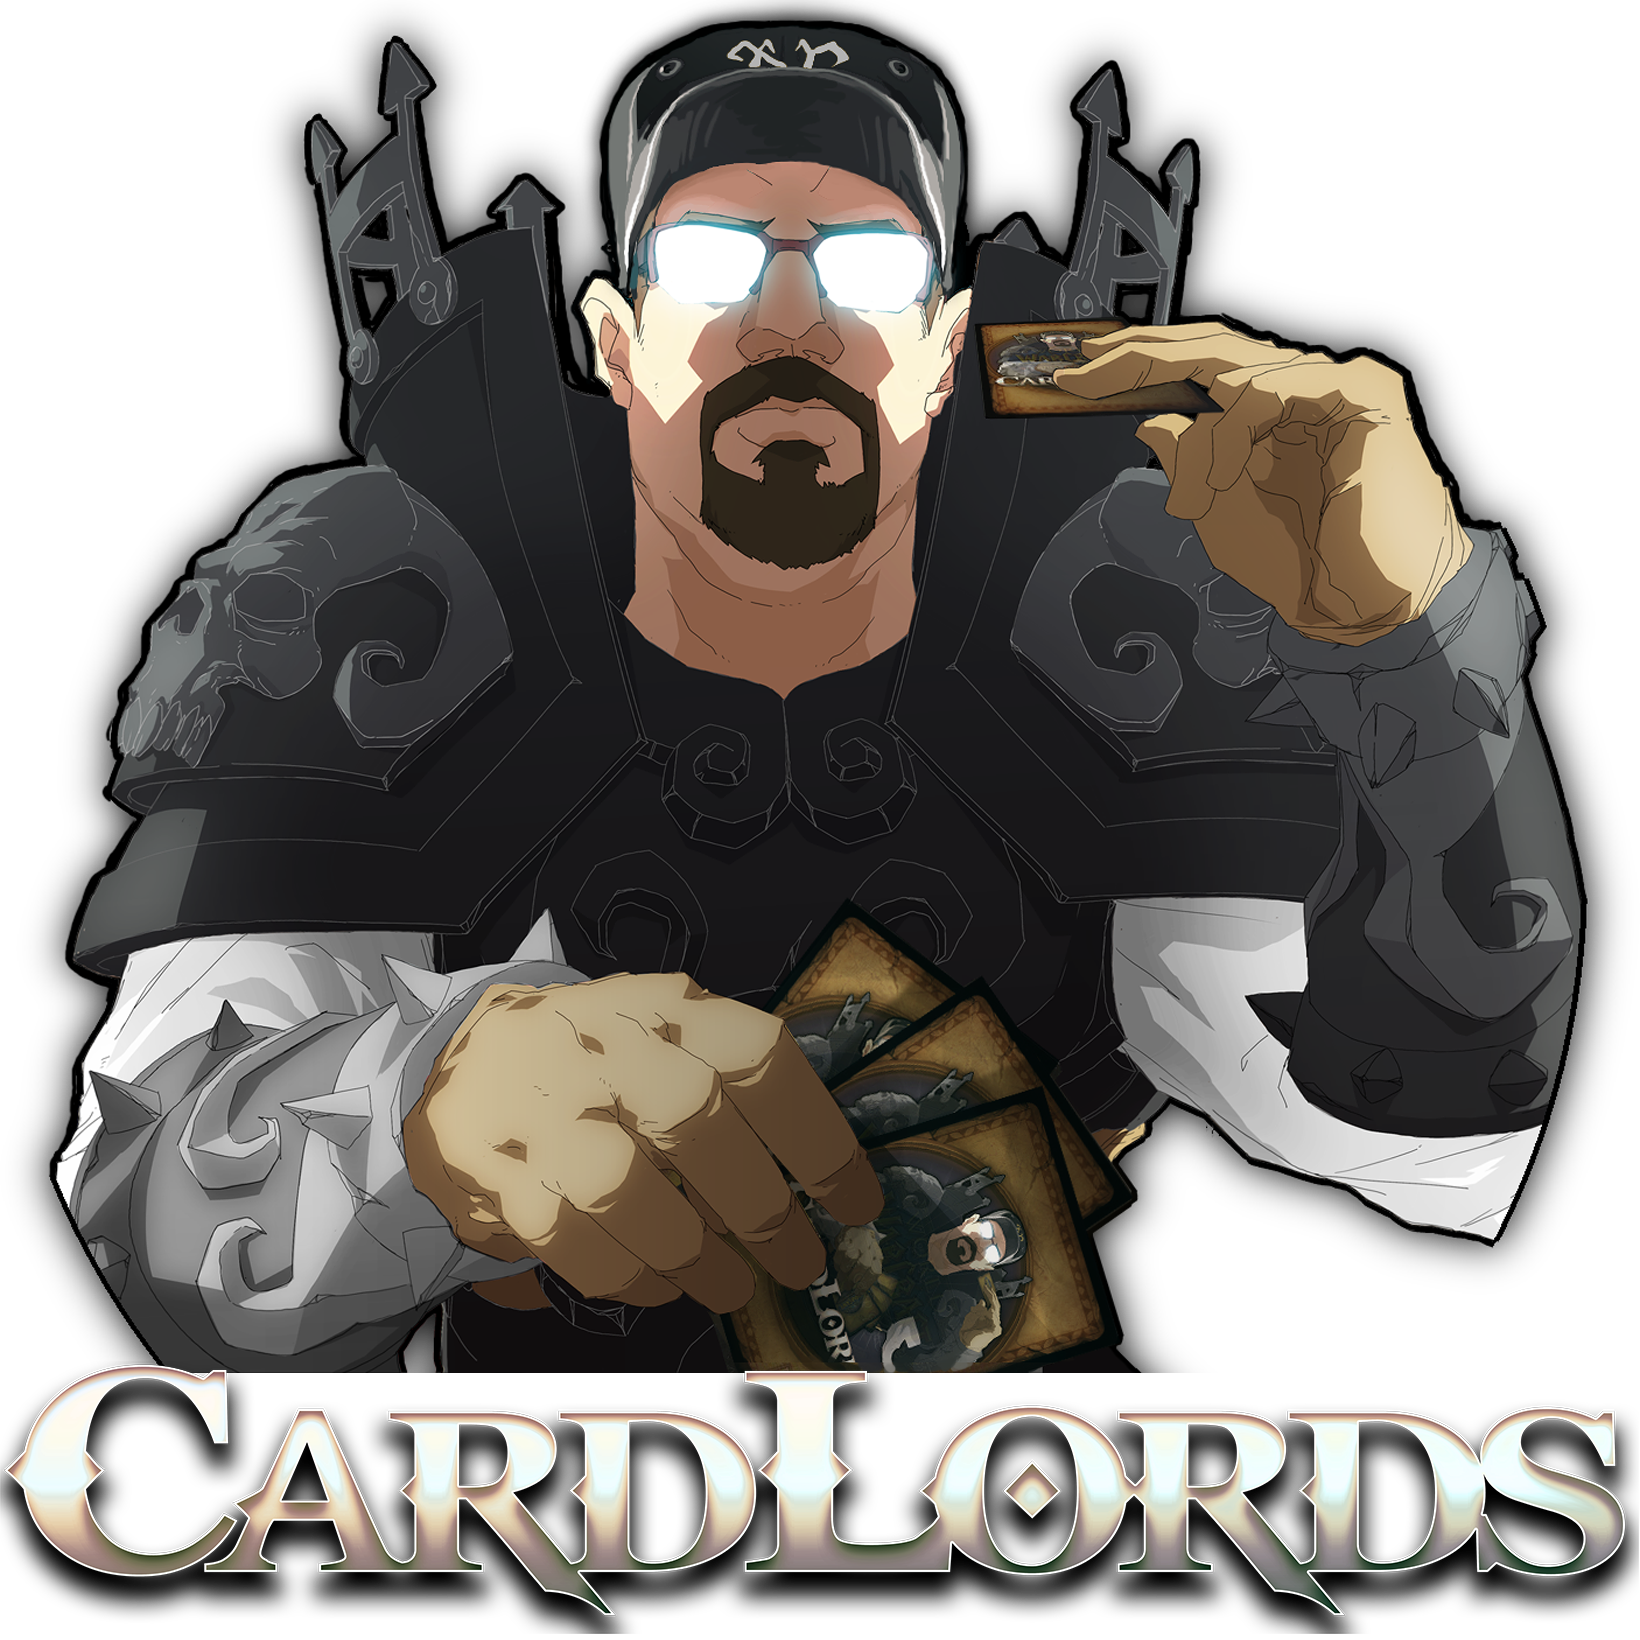 CardLords